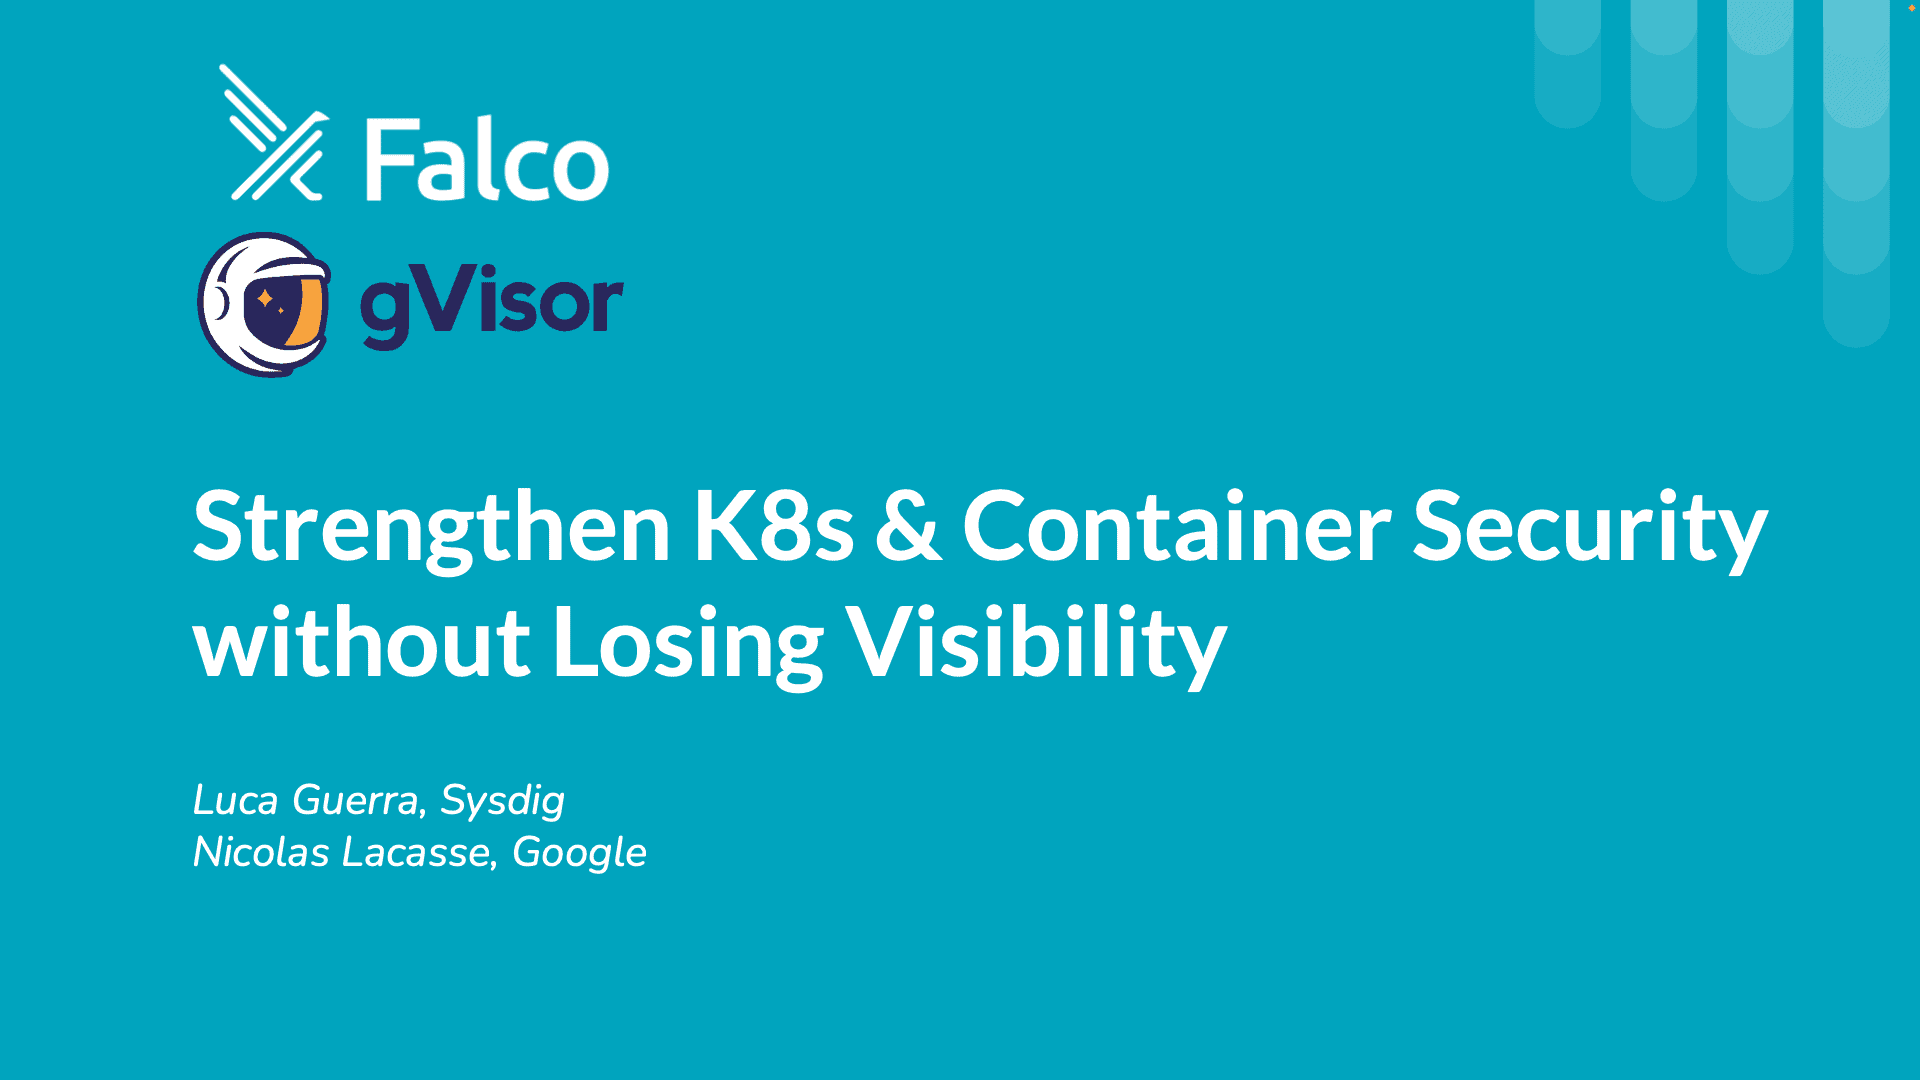 Falco and gVisor online seminar with "Strenghten K8s & Container Security without Losing Visibility" topic, presented by Luca Guerra, Sysdig and Nicolas Lacasse, Google